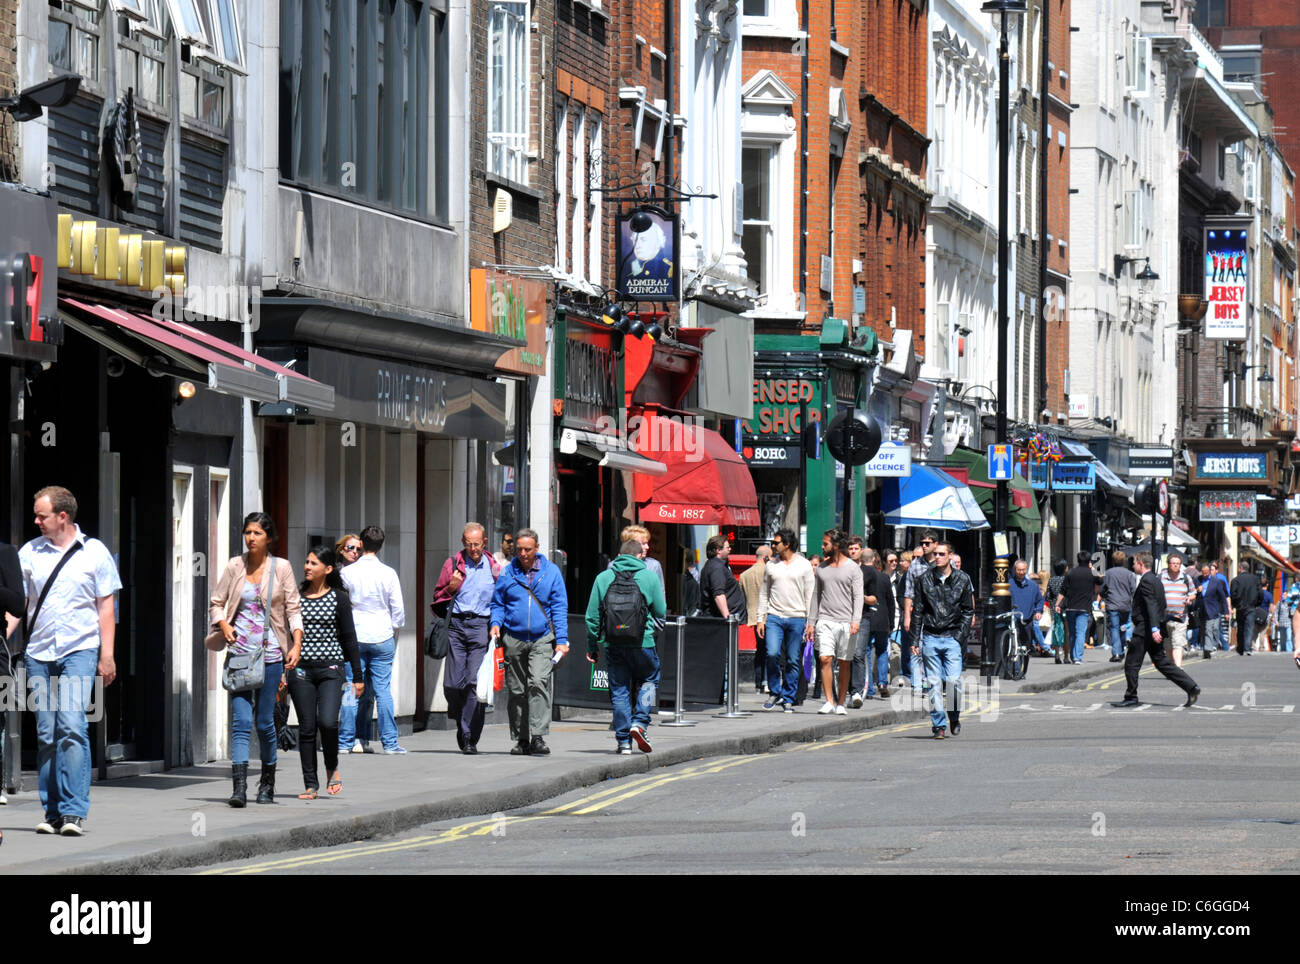 Old Compton Street, Soho, Londres, Angleterre, Royaume-Uni Banque D'Images